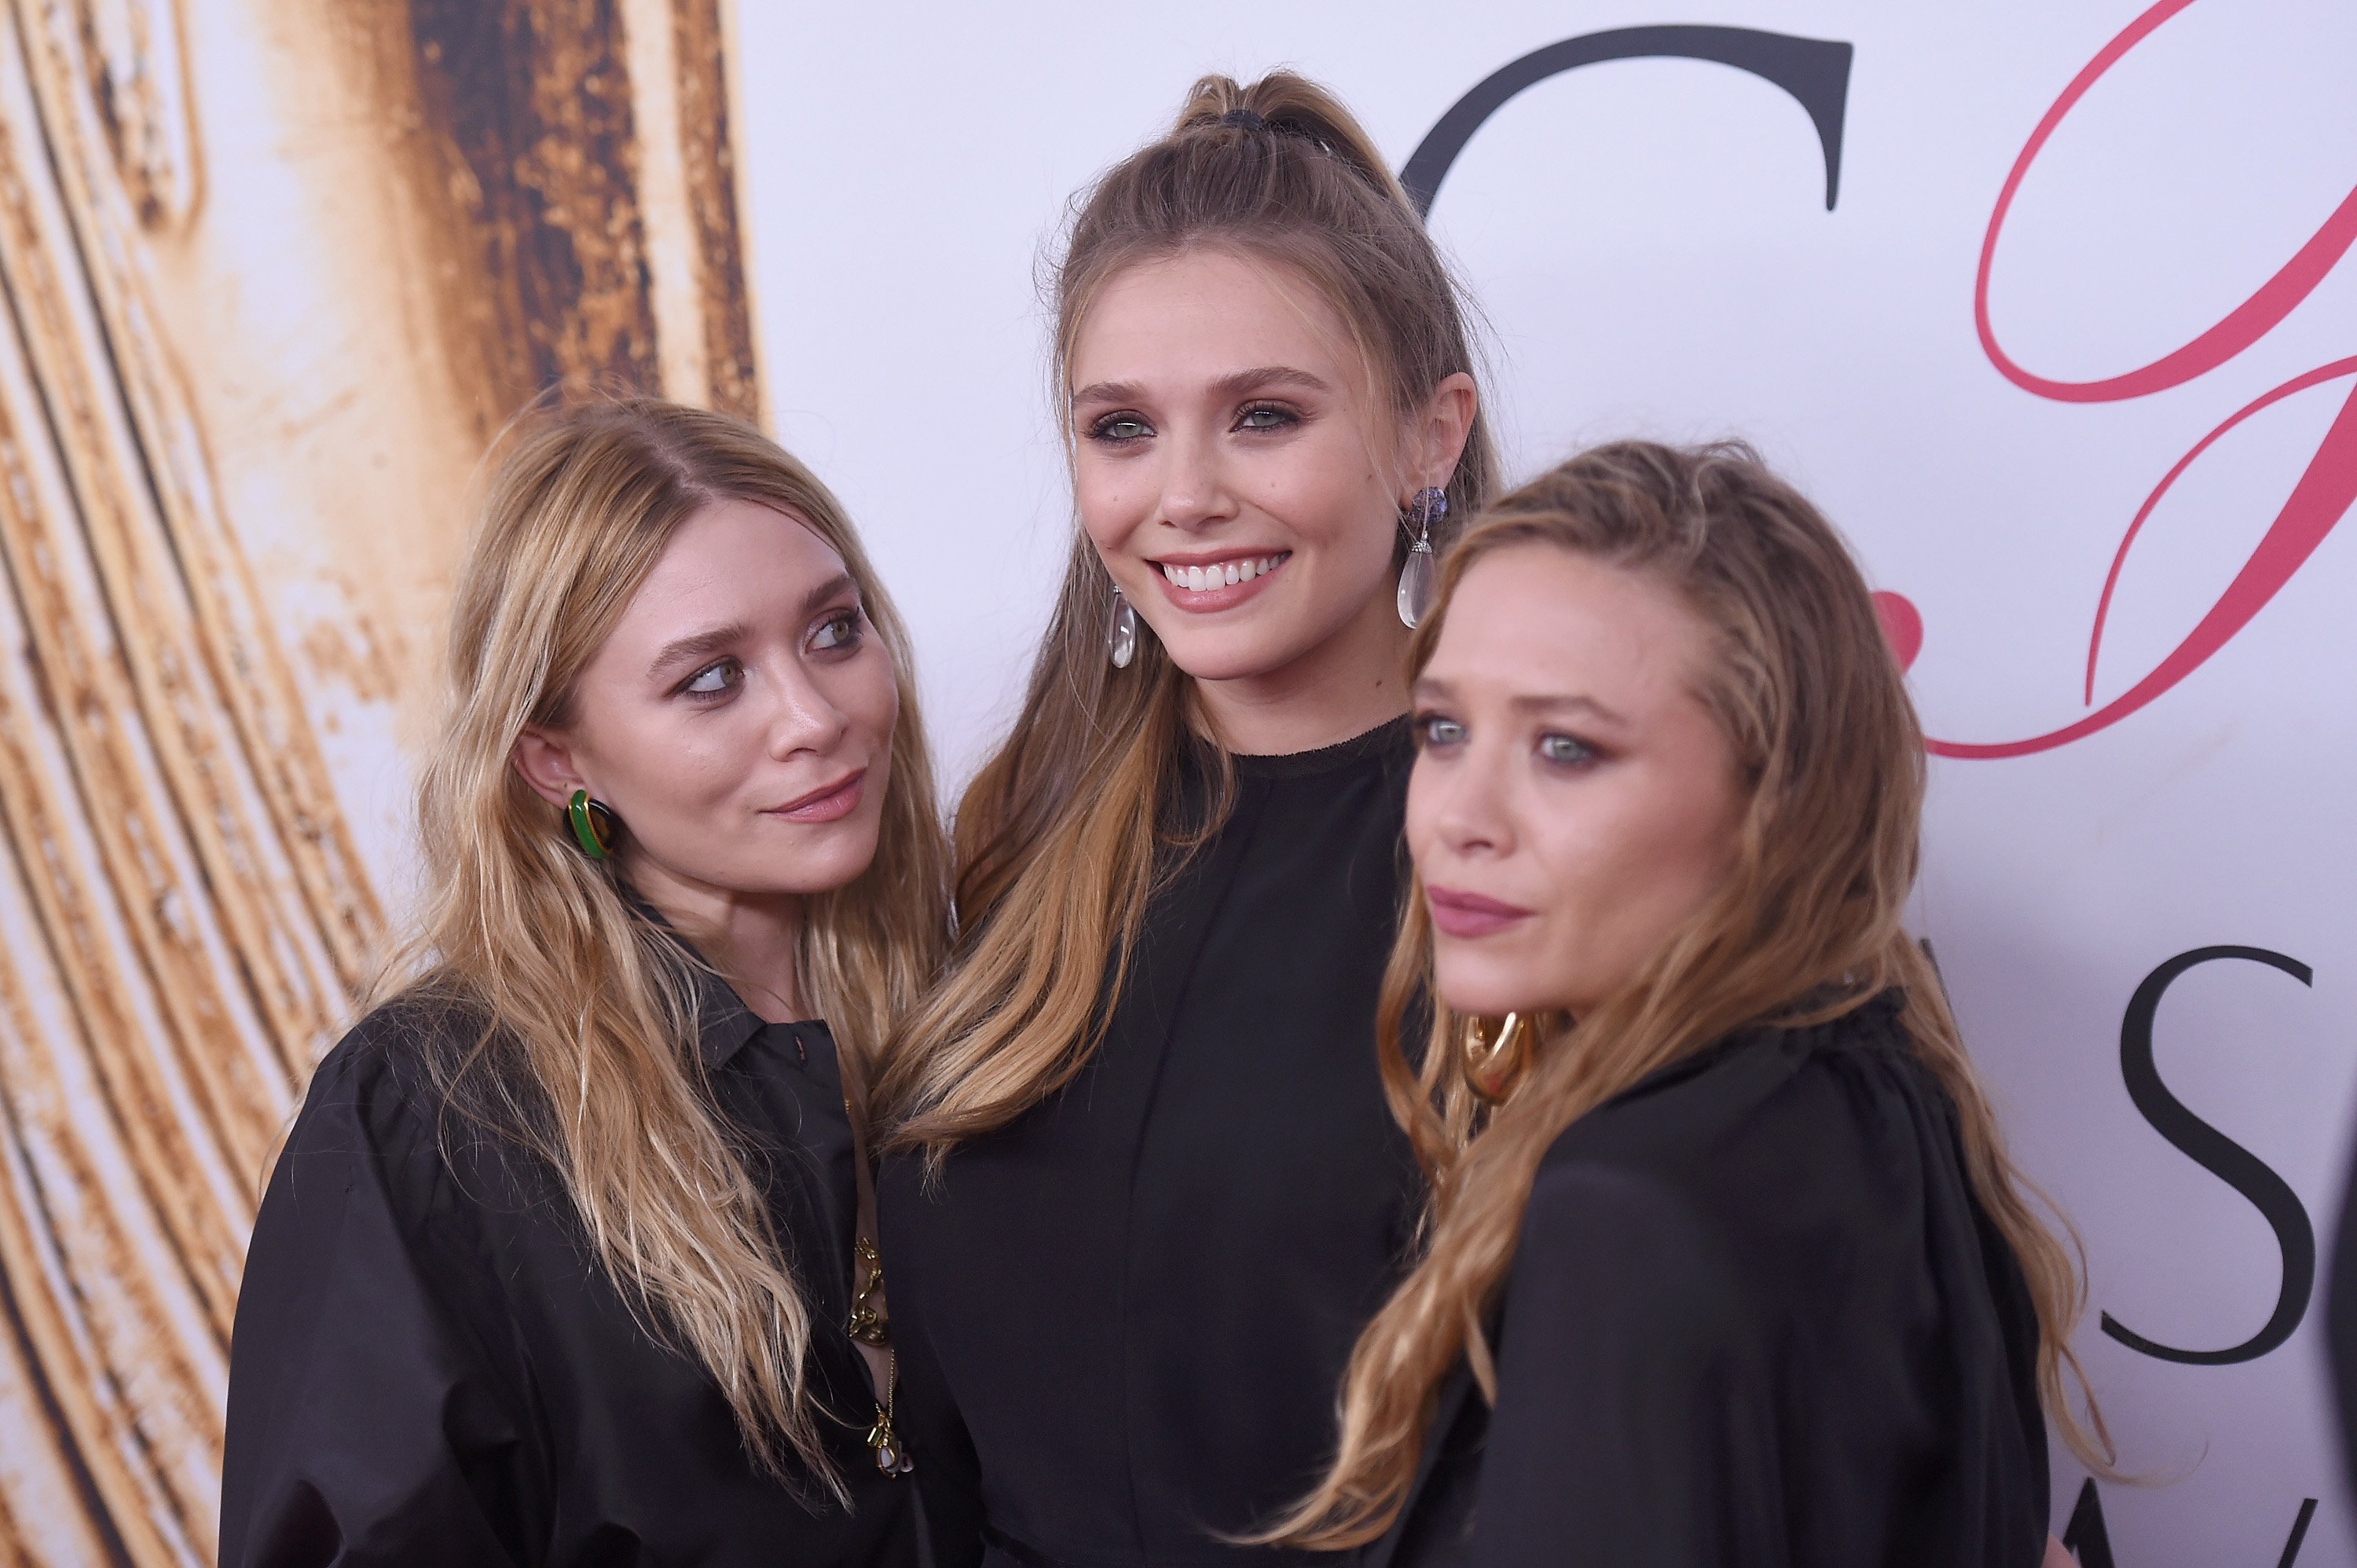  Elizabeth Olsen, Mary-Kate and Ashley Olsen attend the 2016 CFDA Fashion Awards at the Hammerstein Ballroom on June 6, 2016, in New York City. | Source: Getty Images